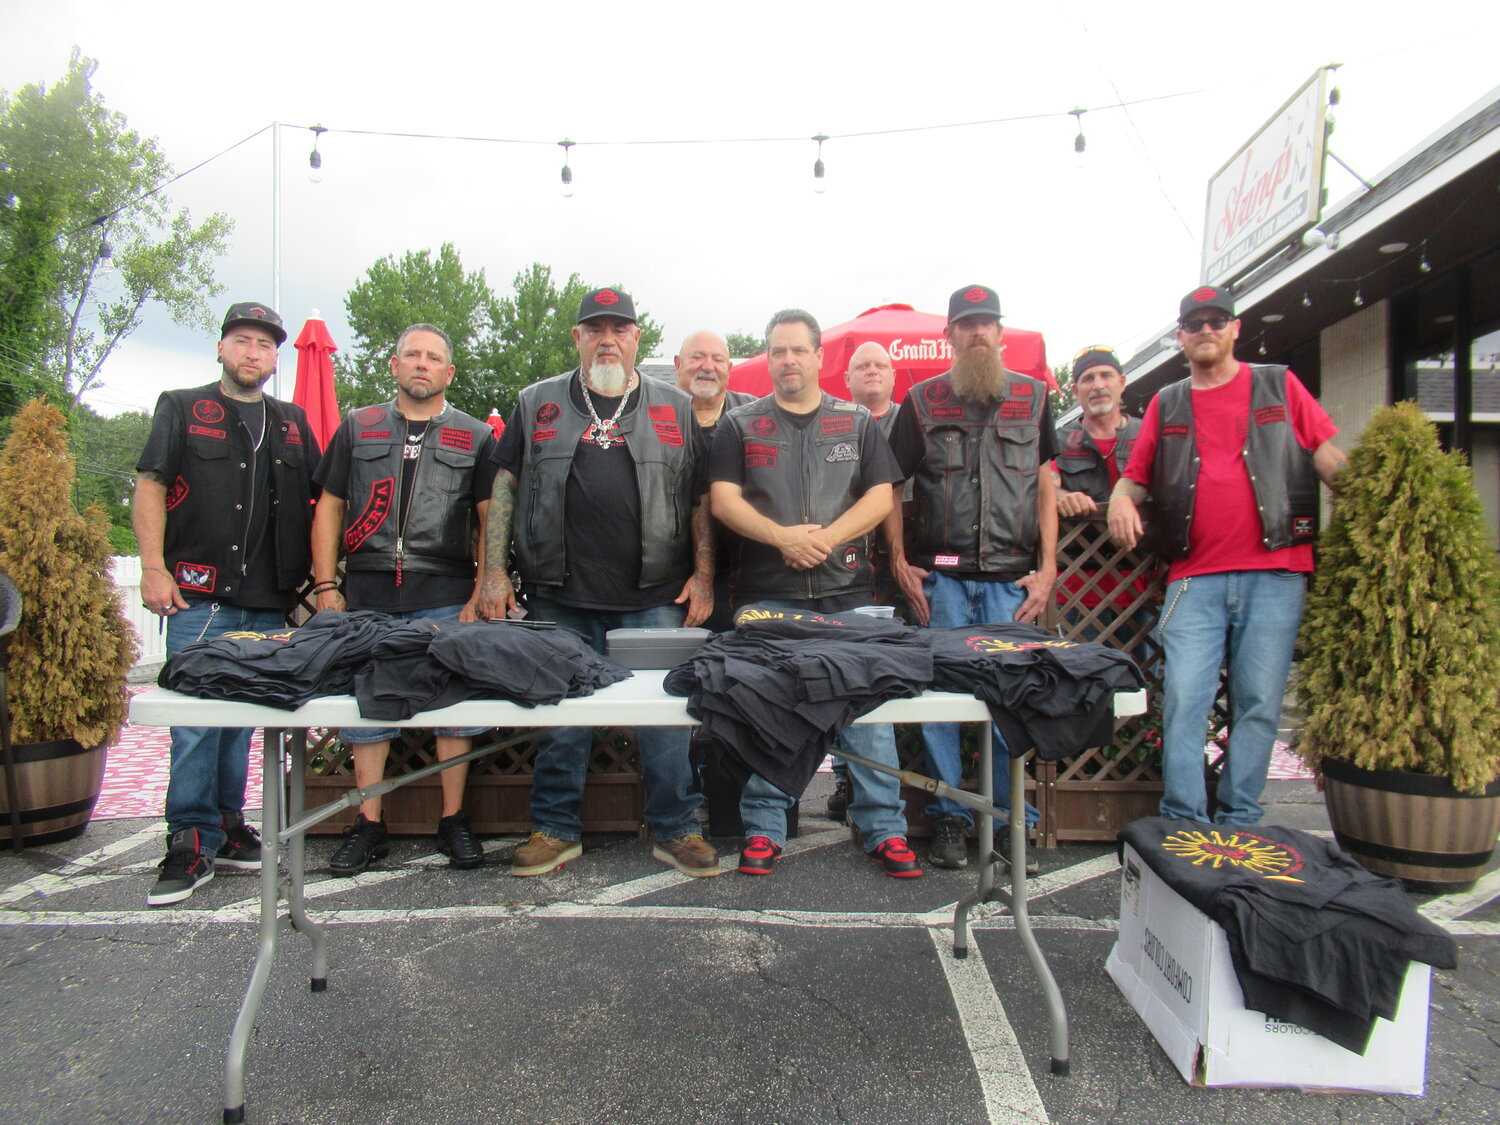 PROUD PRESENTERS: Members of the Goodfellas Motorcycle Club are standing behind a table topped with special tee shirts for the bikers in their 7th annual run. The group includes Ryan Connolly, Joe Ratte Jr., Derek Duffy, Cal Calabro, Nick Demetropoulos, Bill Pryor, Kevin Marandola, Ray Chase, Kevin Hart and Ryan Koscielnak.